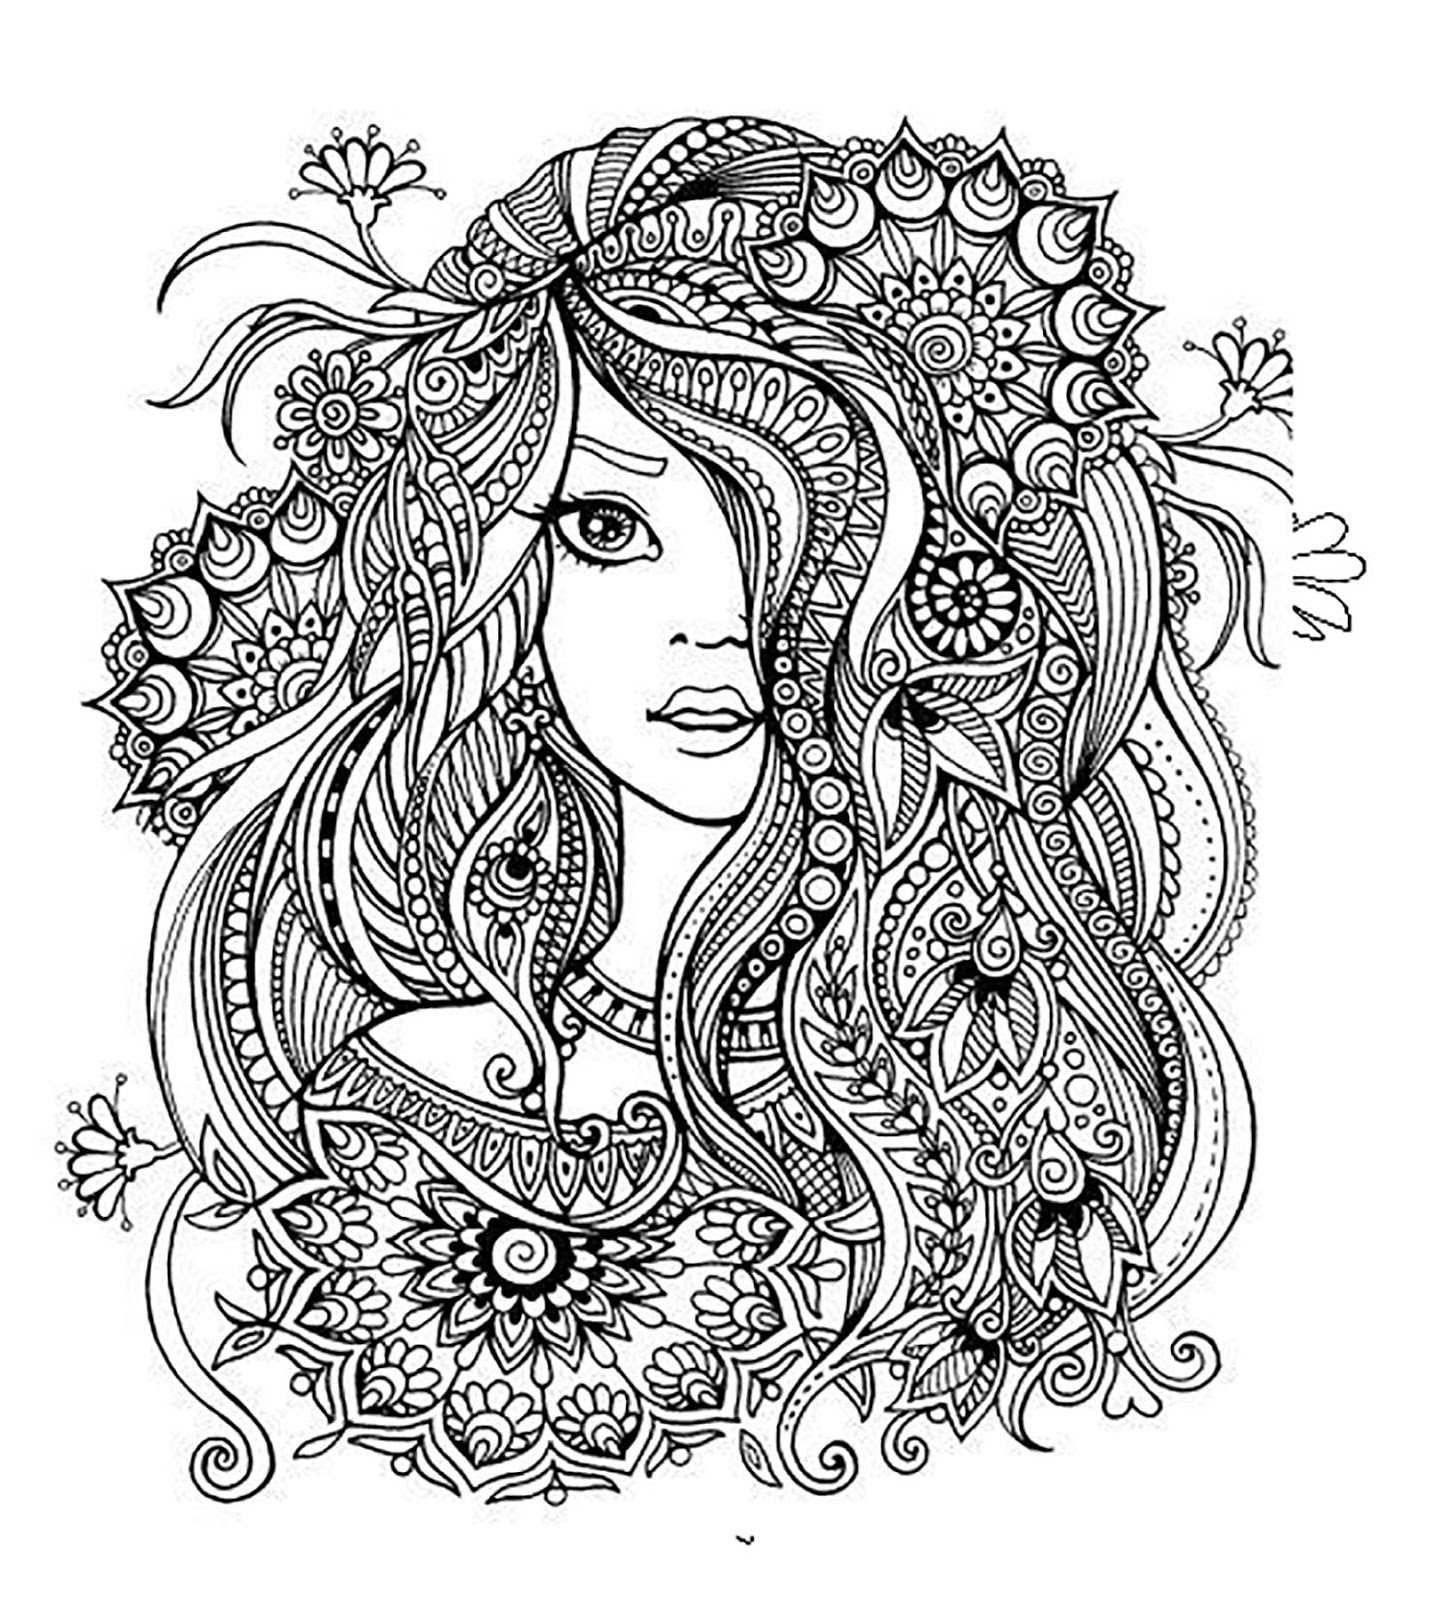 Great adult coloring page